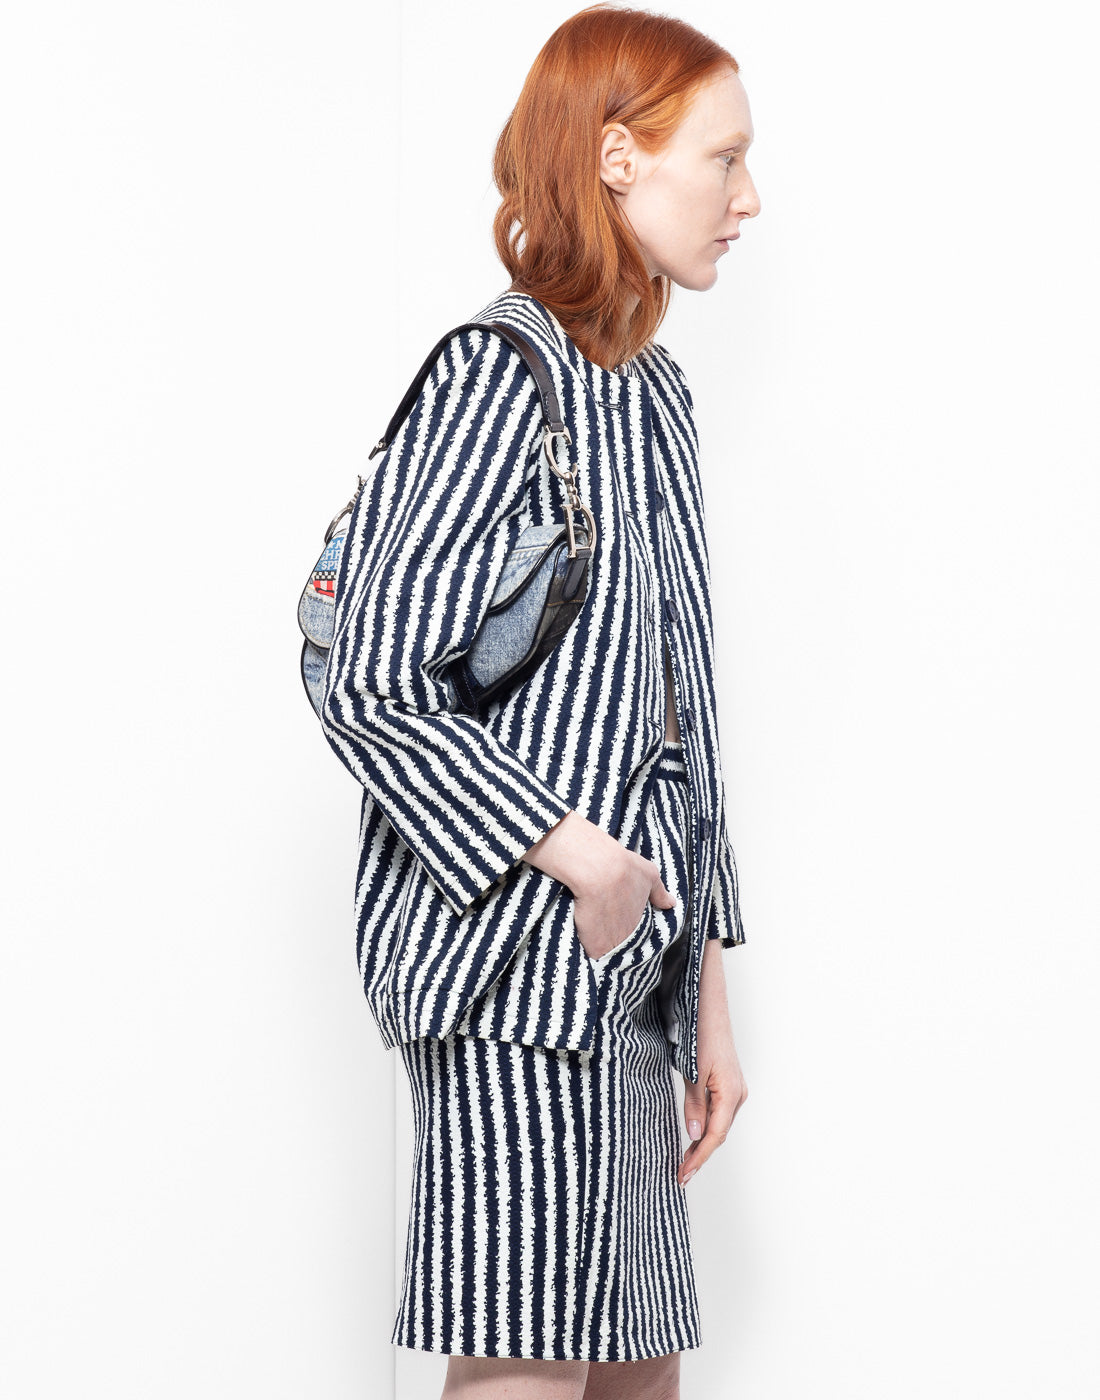 VIntage YSL irregular striped cotton jacket in shades of navy blue and white